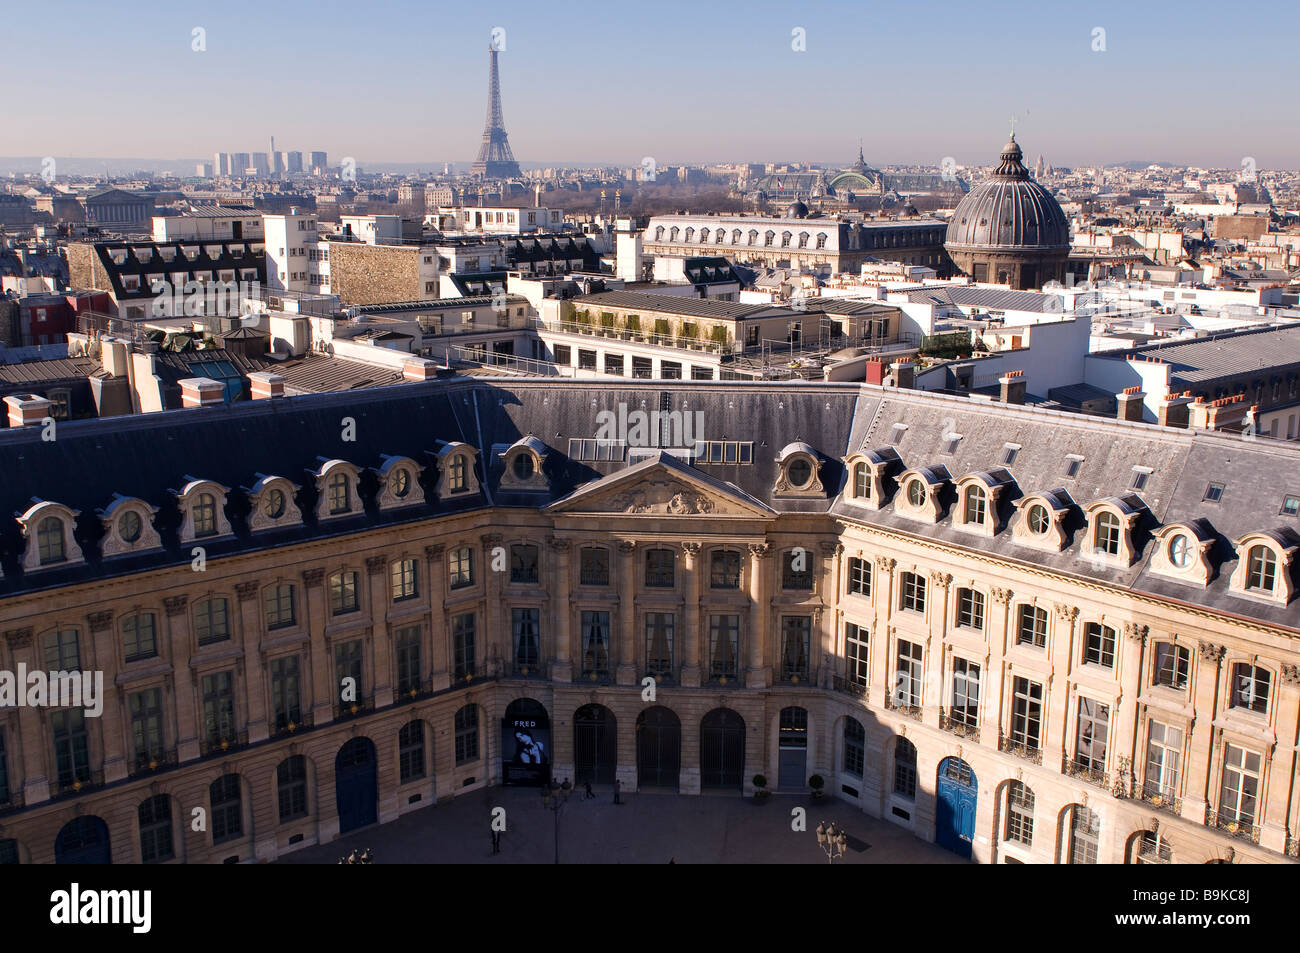 France, Paris, buildings of Vendome square and the Eiffel Tower Stock Photo